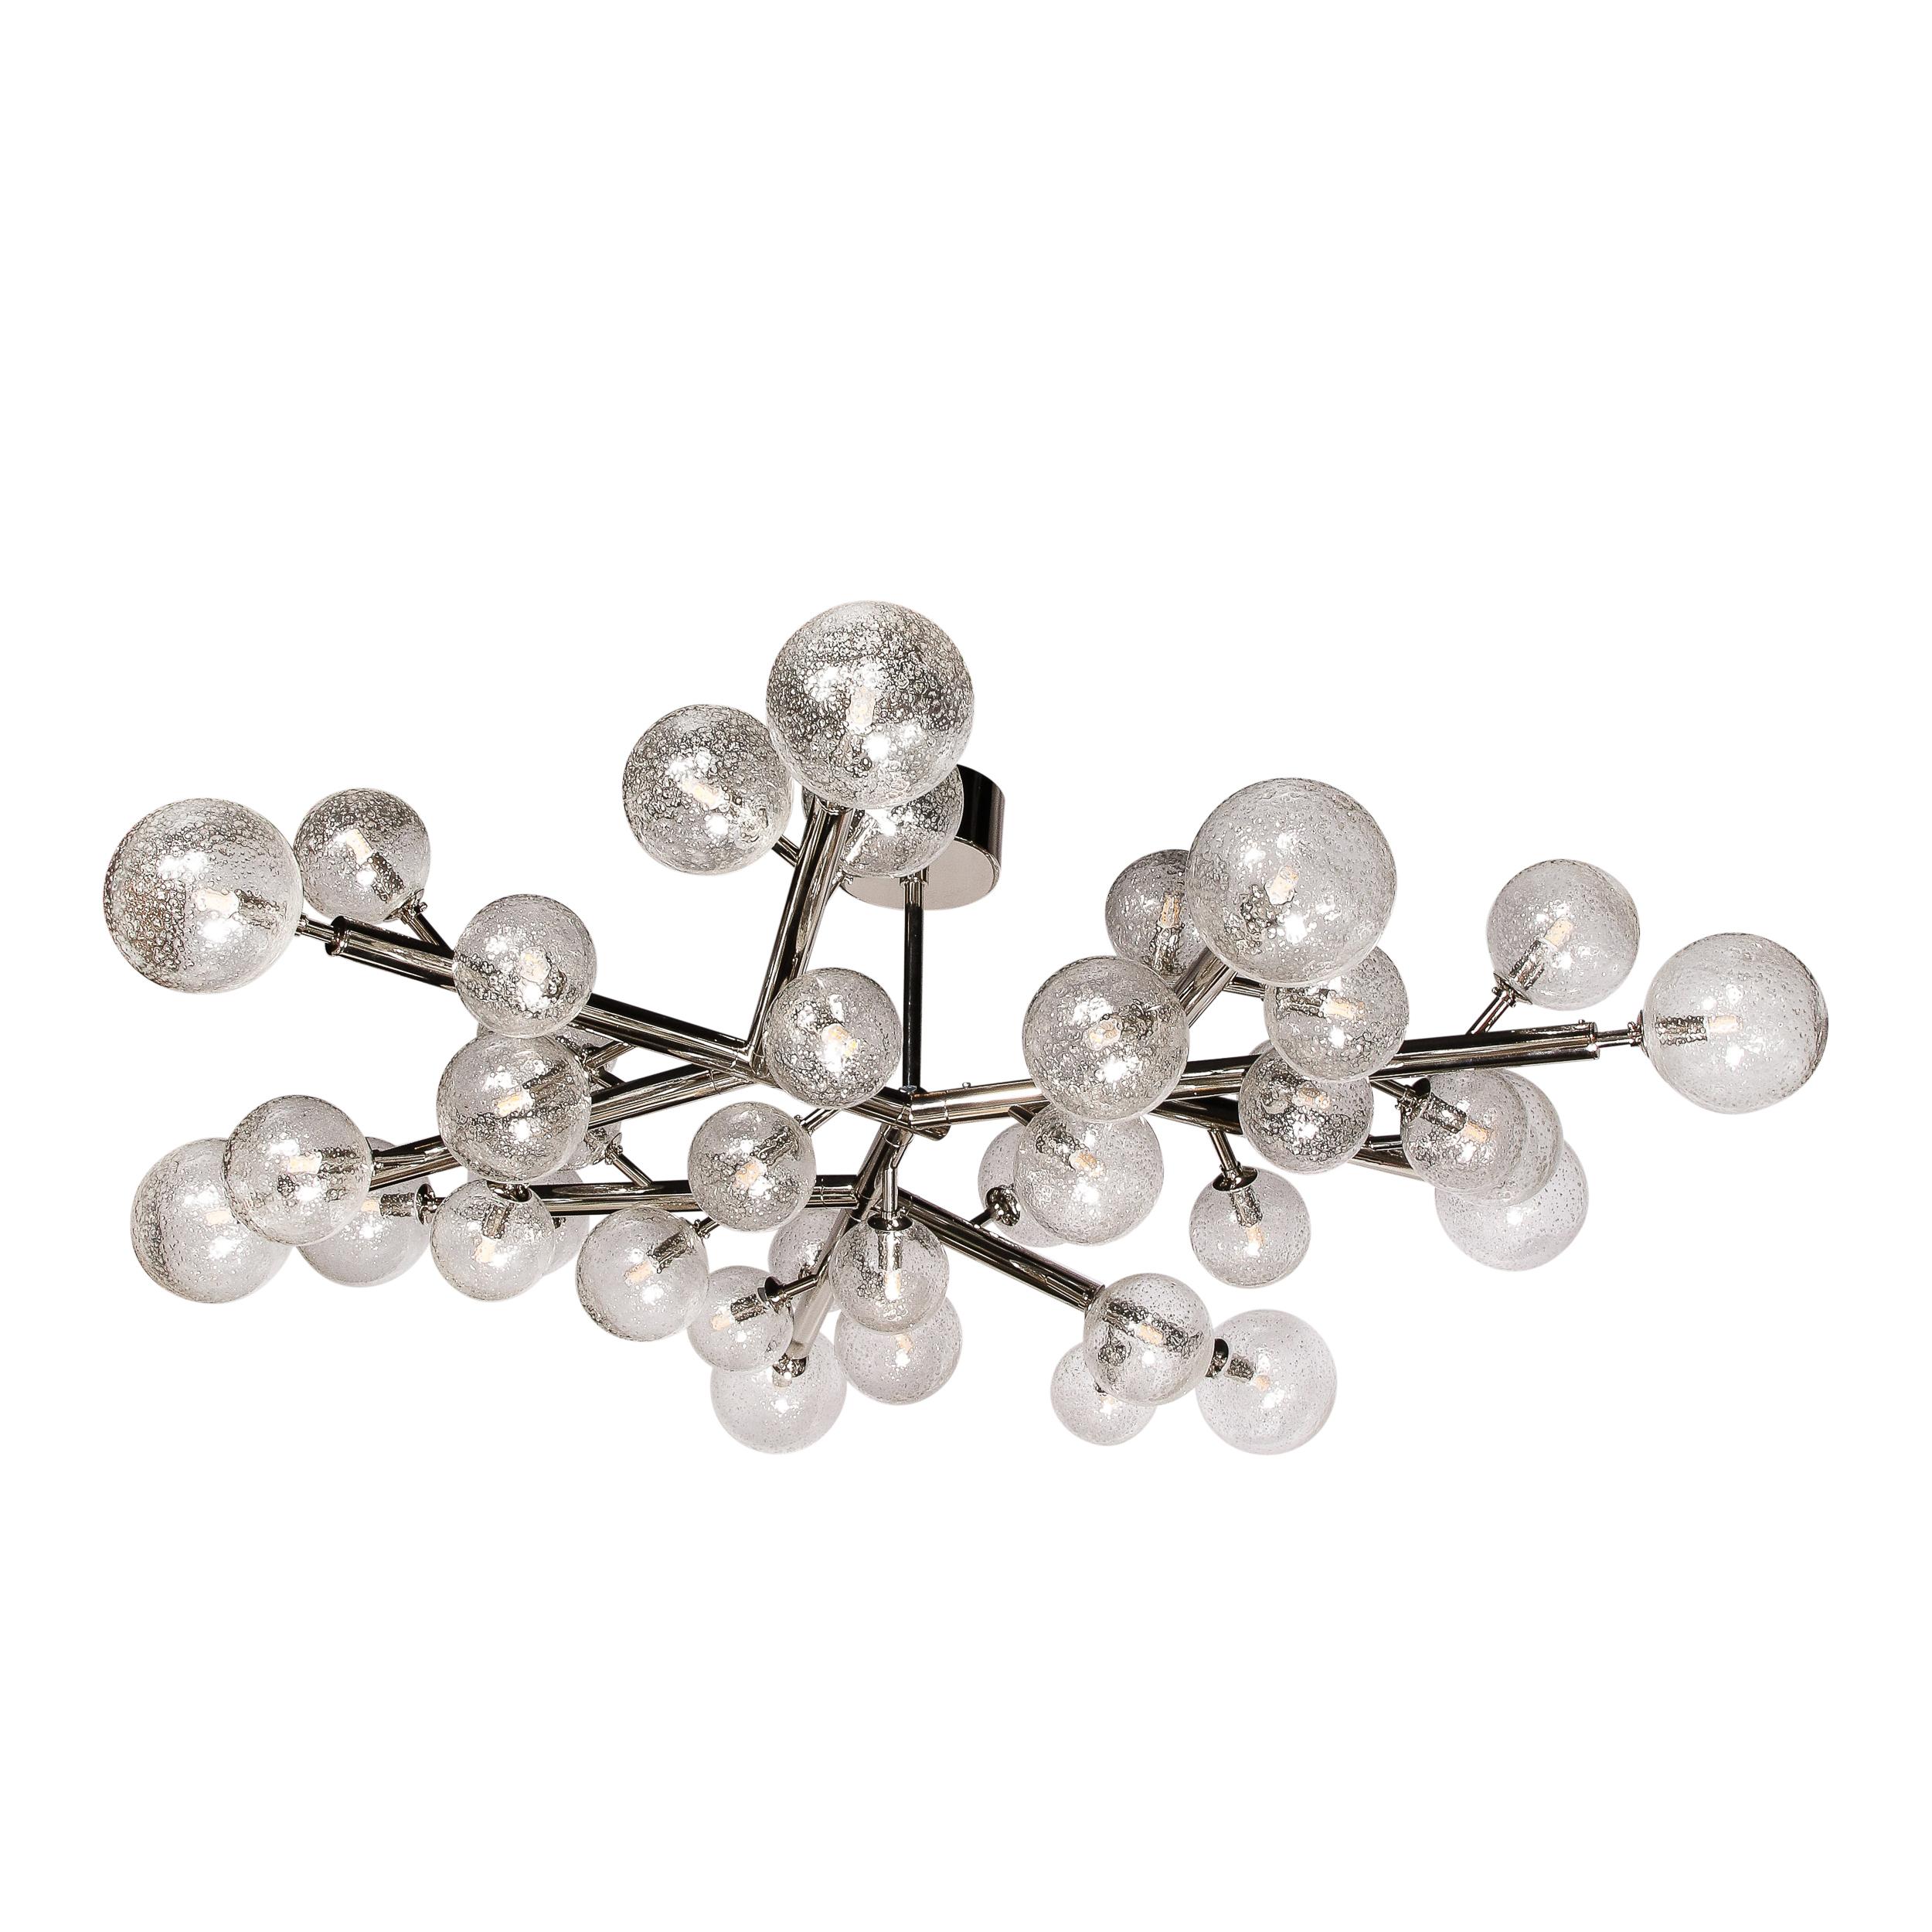 This stunning and dramatic polished Nickel and Handblown Murano glass Molecular 